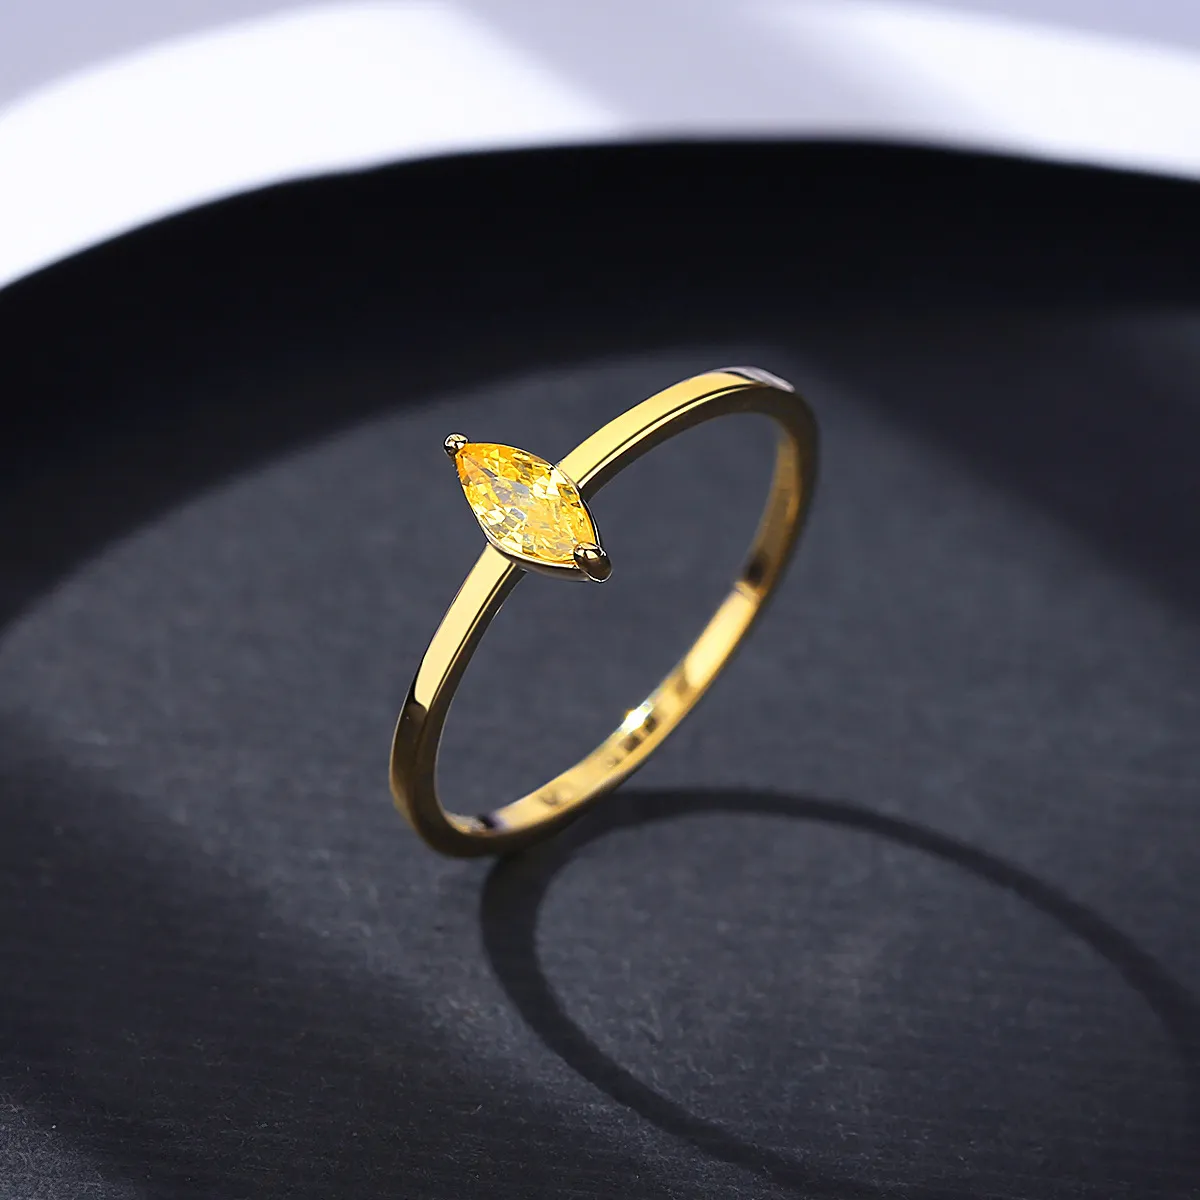 AAA Zircon Ring S925 Sterling Silver Ring Plated 18k Gold Women Brand Ring European and American Hot Popular Eyes Zircon High end Ring Jewelry Valentine's Day Gift spc